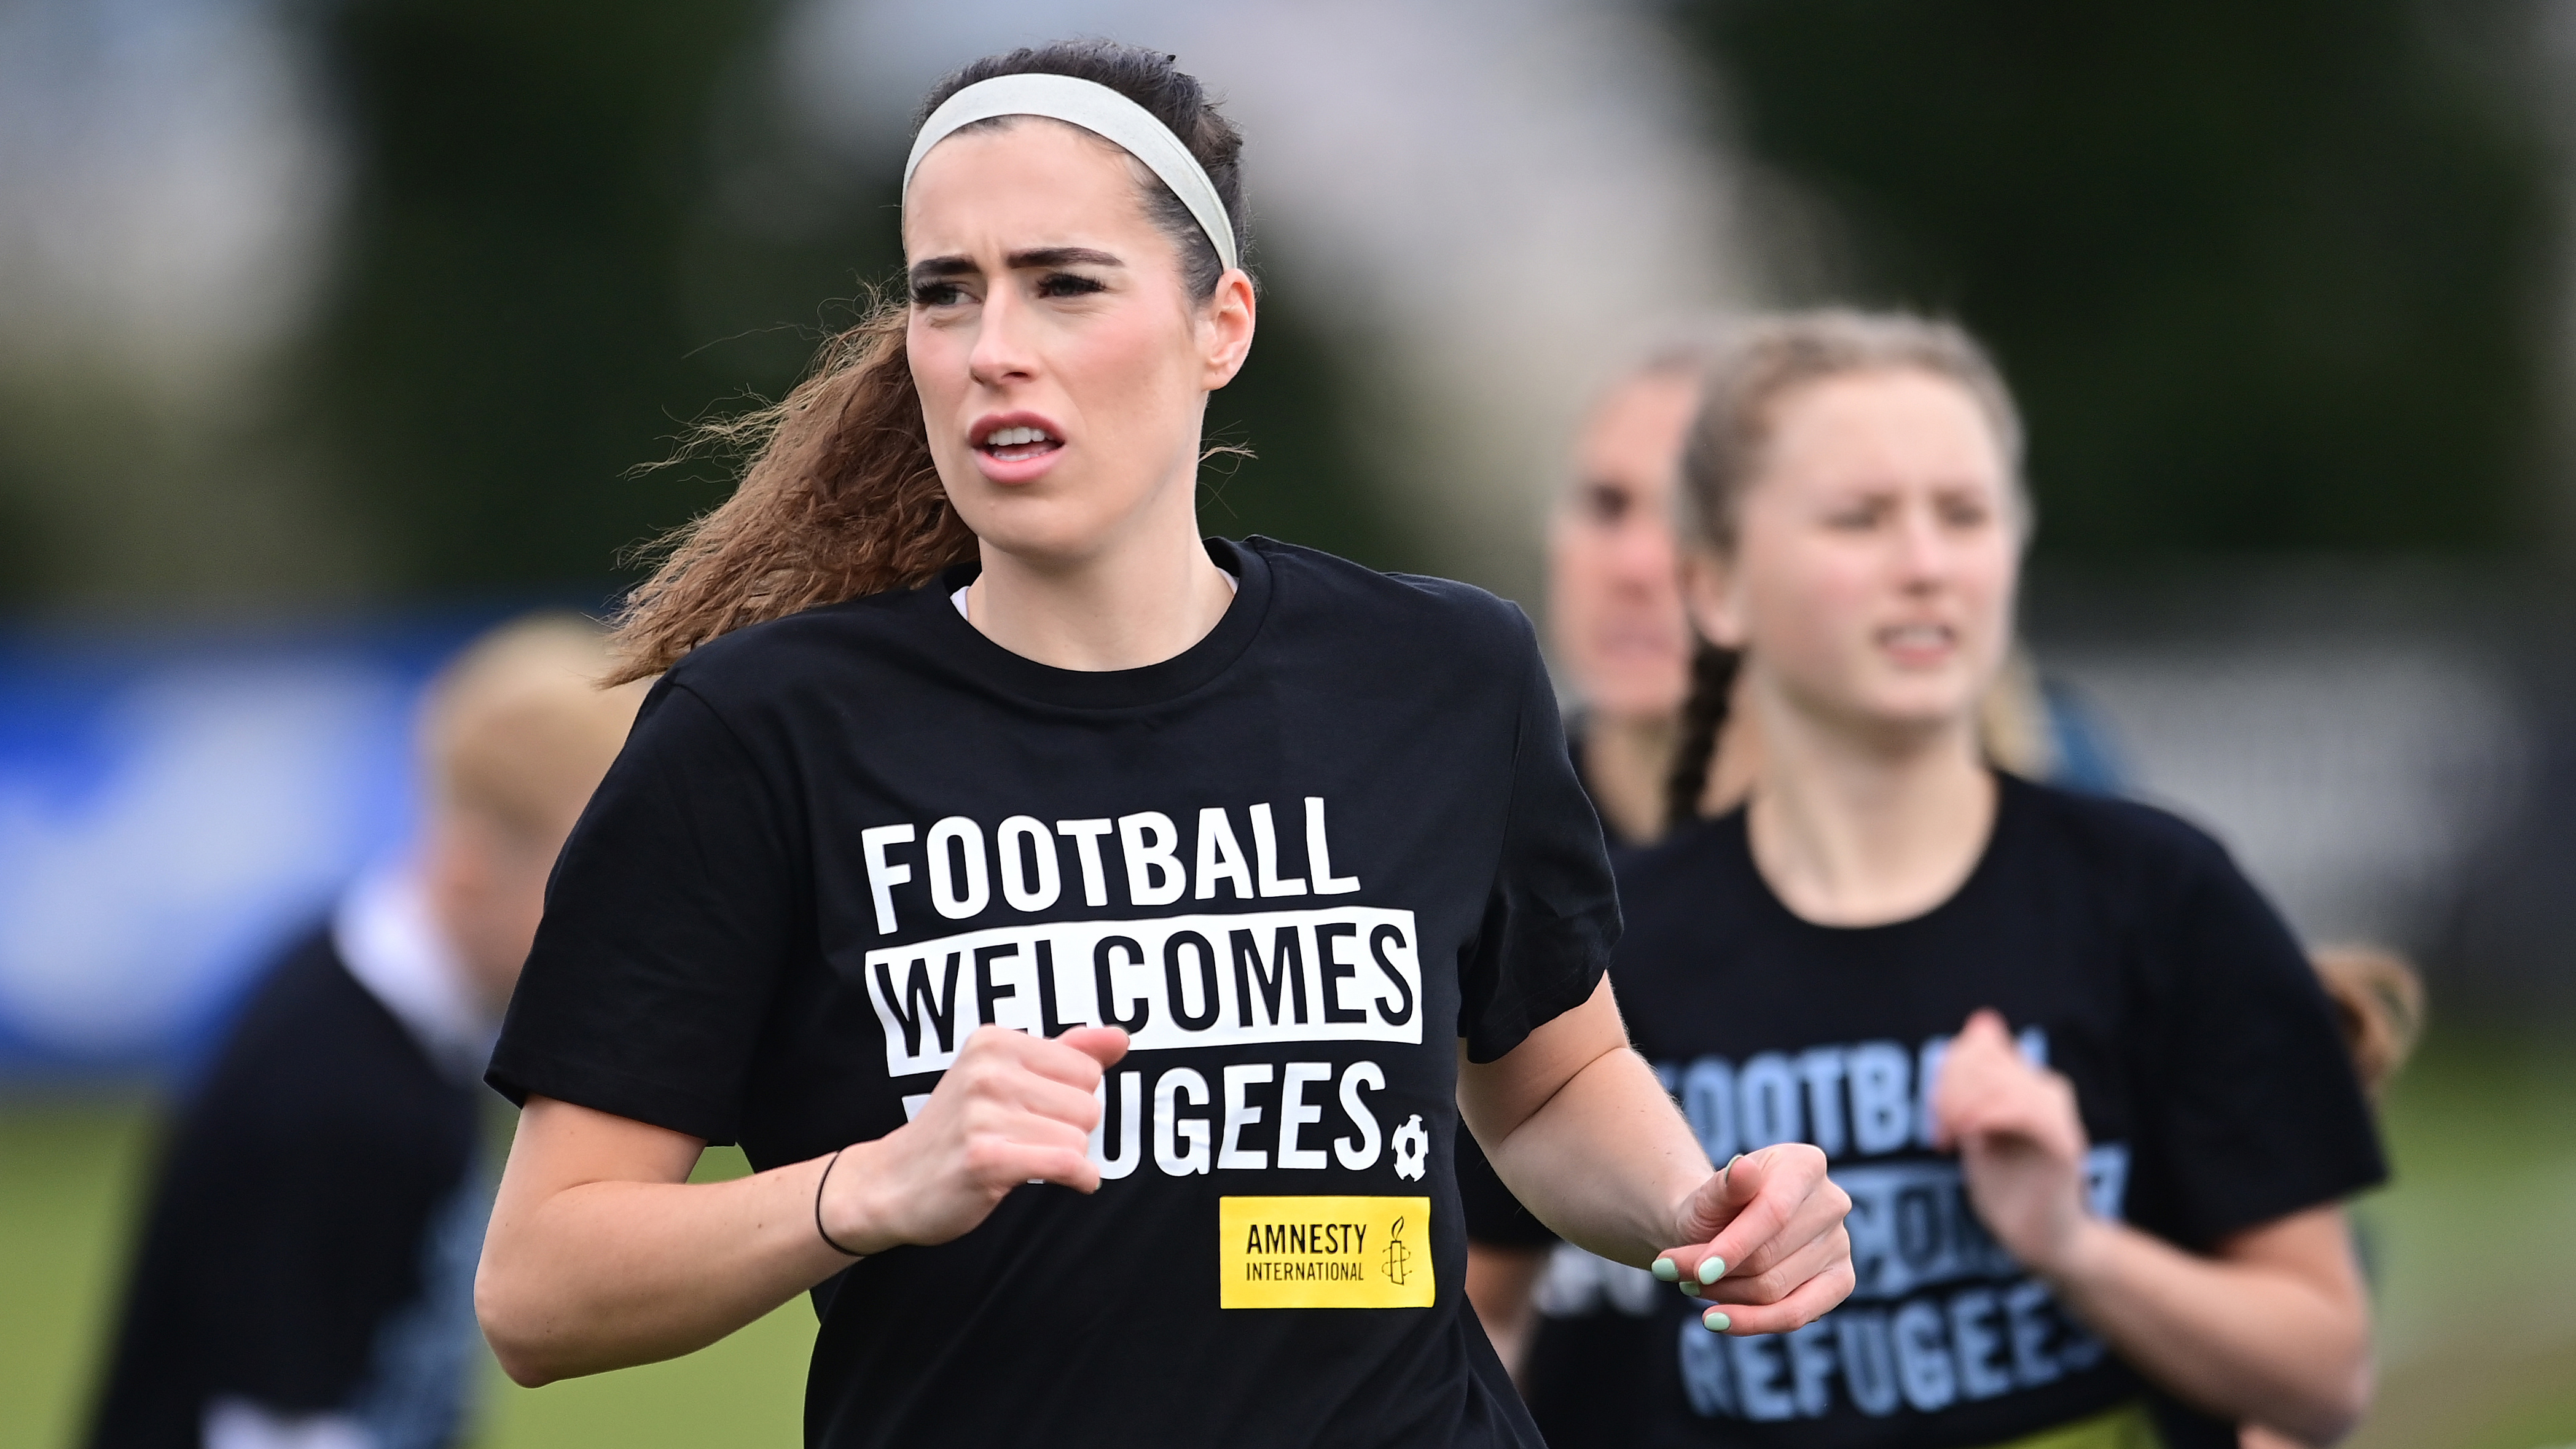 Swansea City ladies warm up in football welcomes shirts